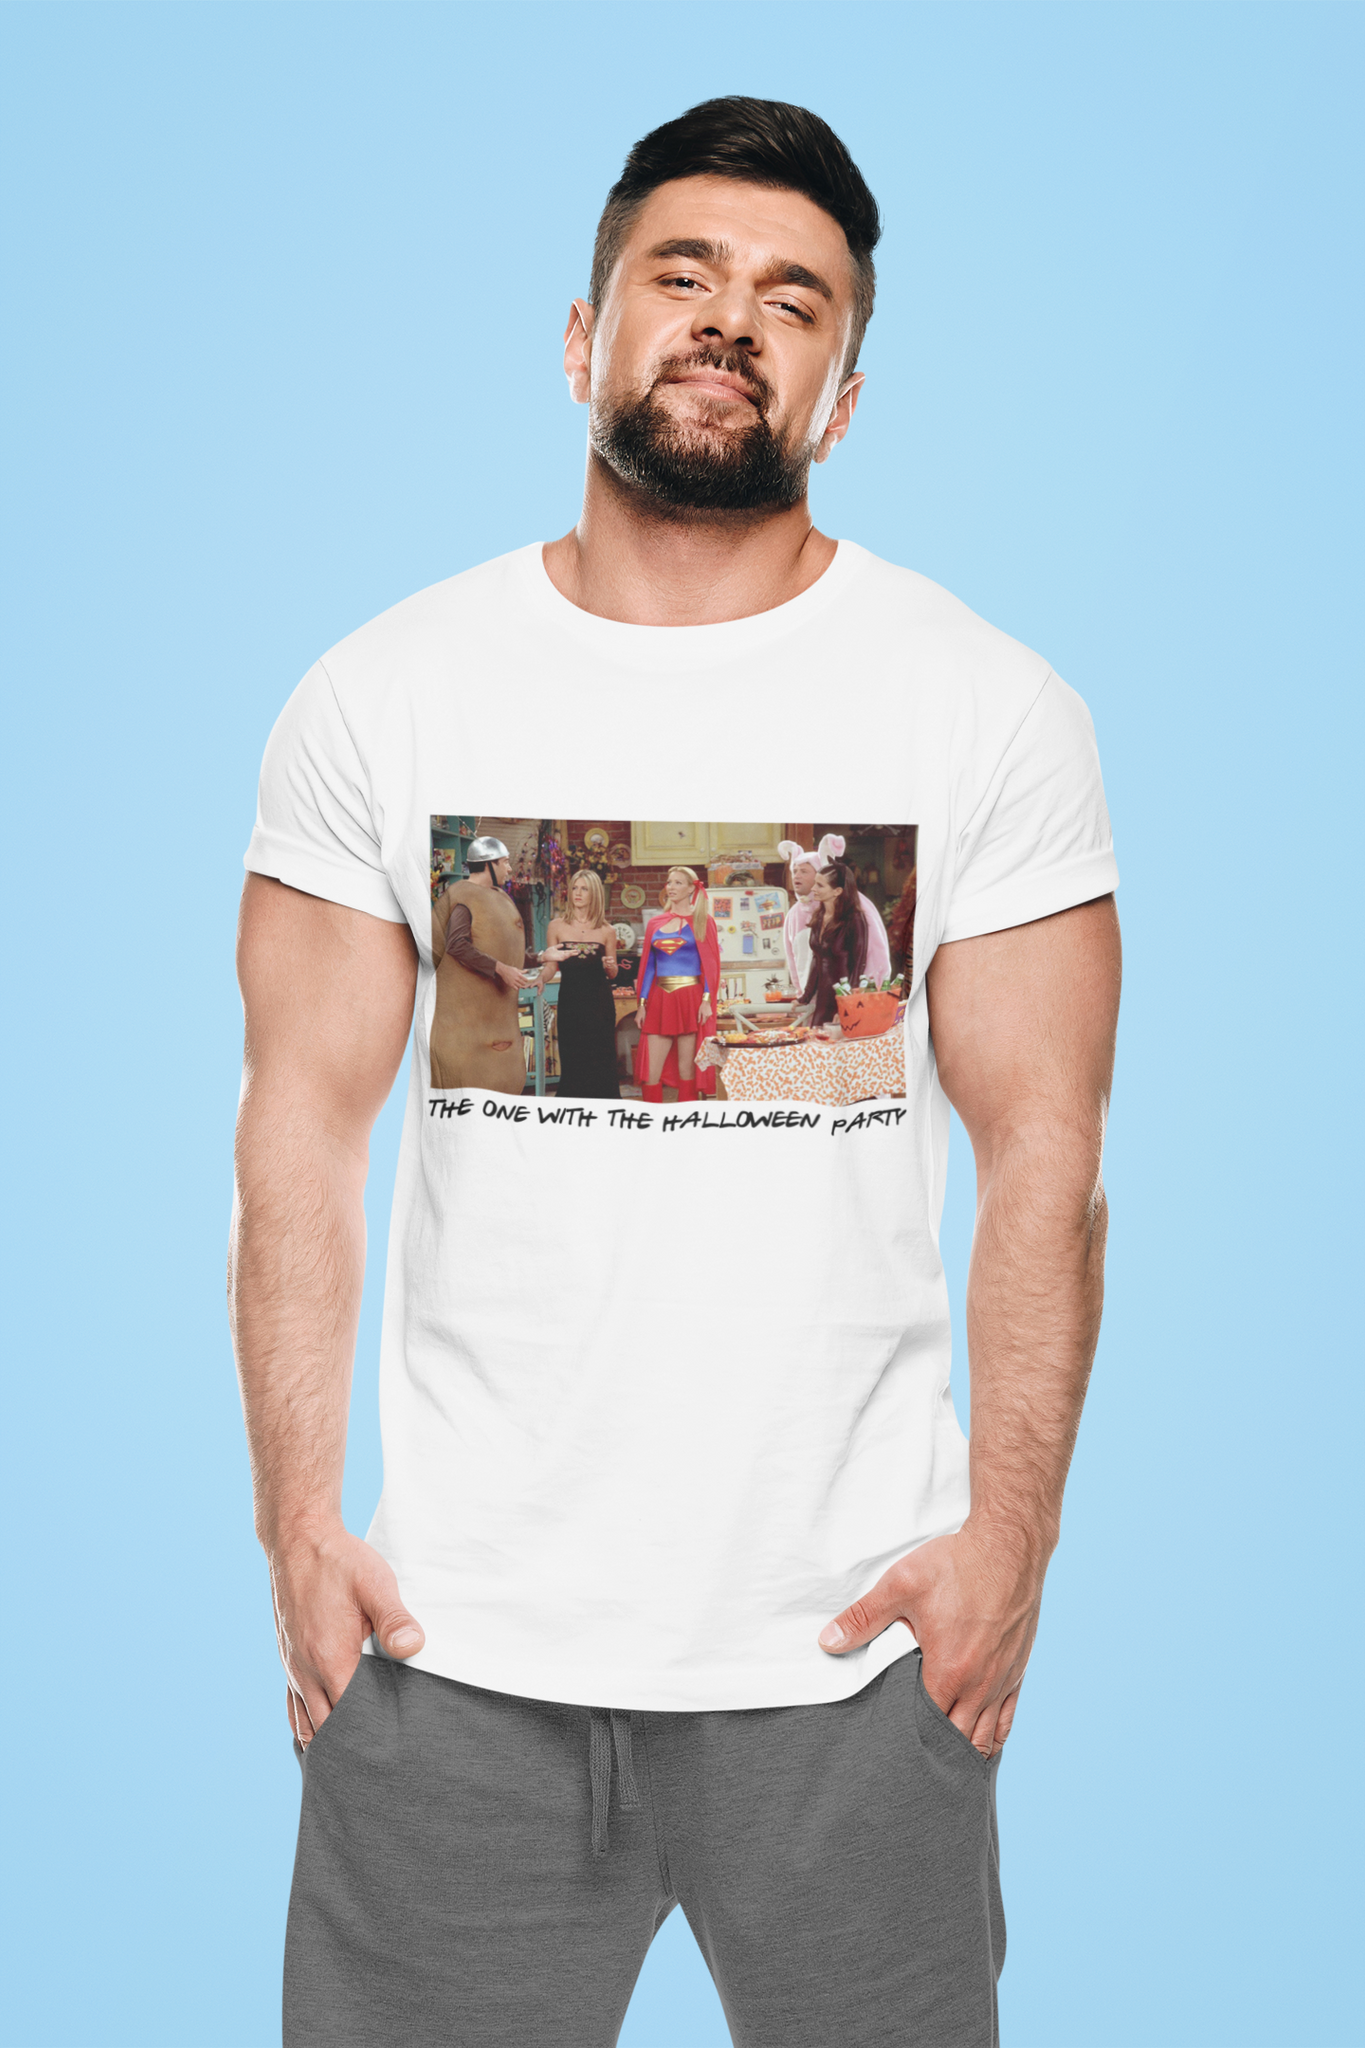 Friends TV Show T Shirt, Friends Shirt, Friends Halloween Costumes T Shirt, The One With The Halloween Party Tshirt, Halloween Gifts